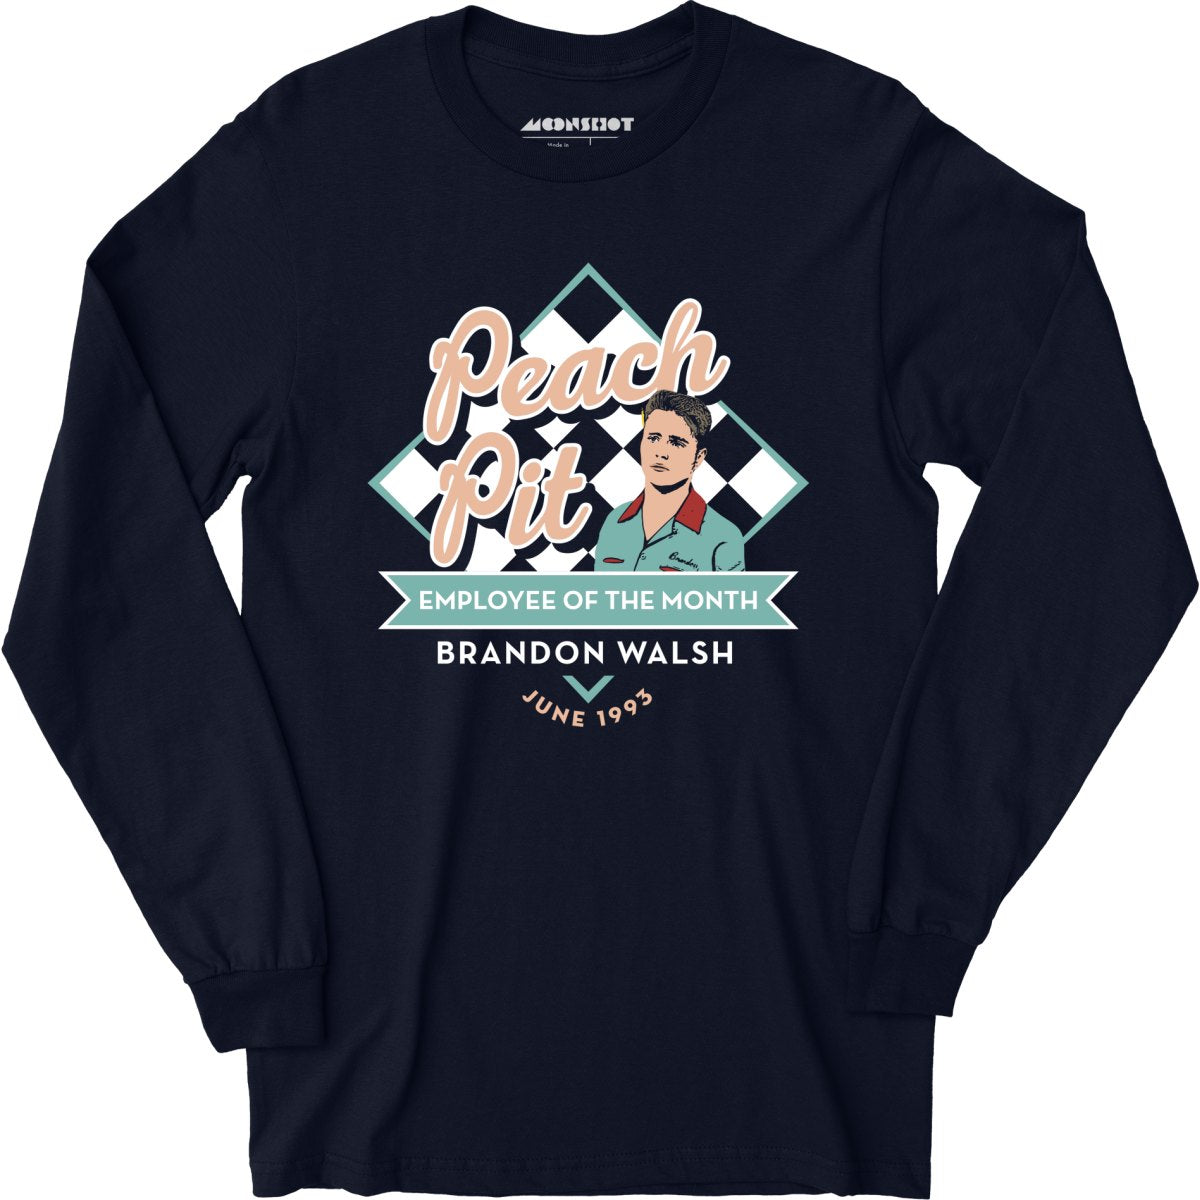 Peach Pit Employee of The Month - 90210 - Long Sleeve T-Shirt